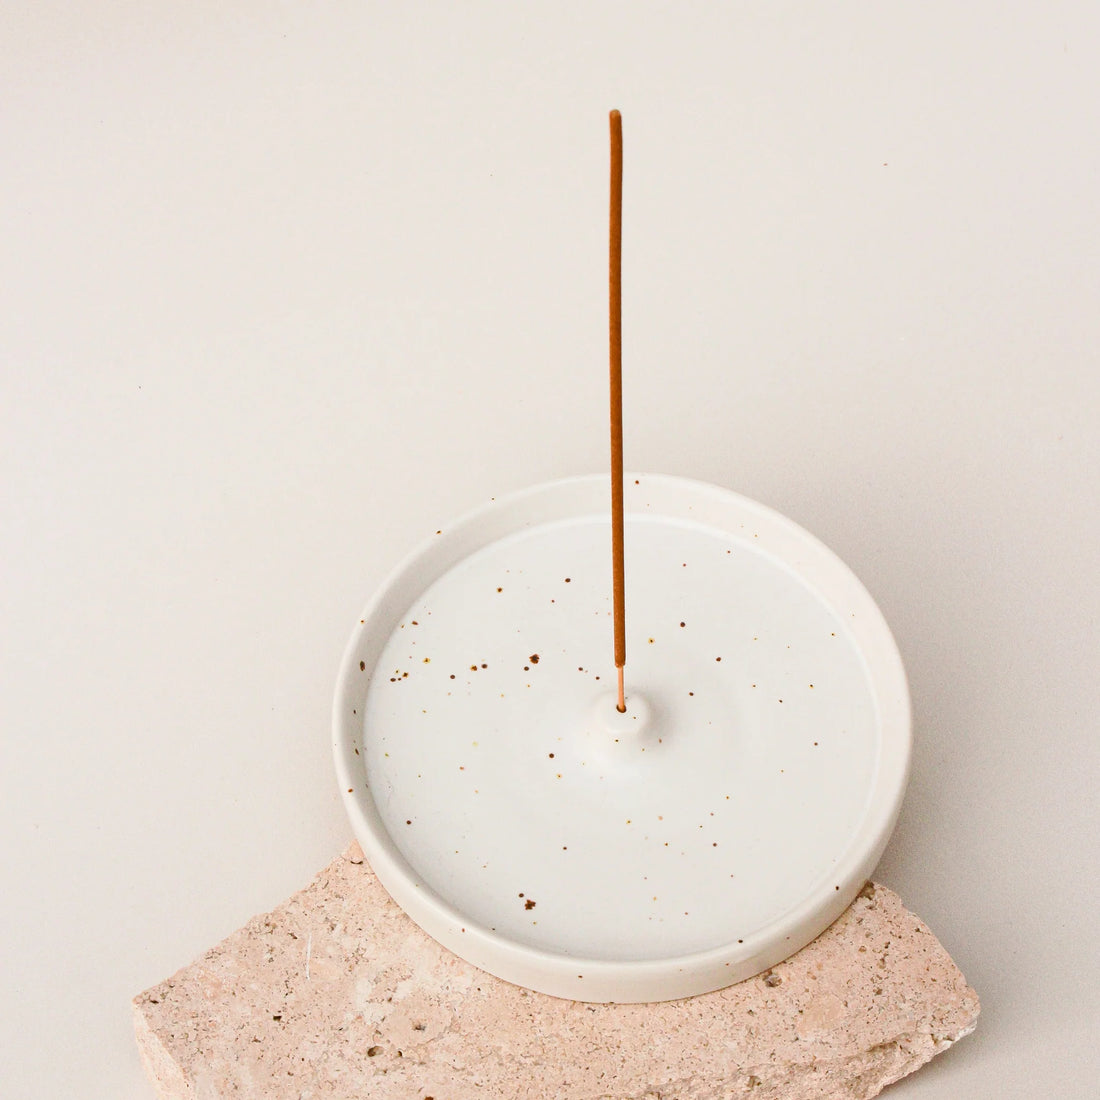 Fountain Incense Holder by The Commonfolk Collective 